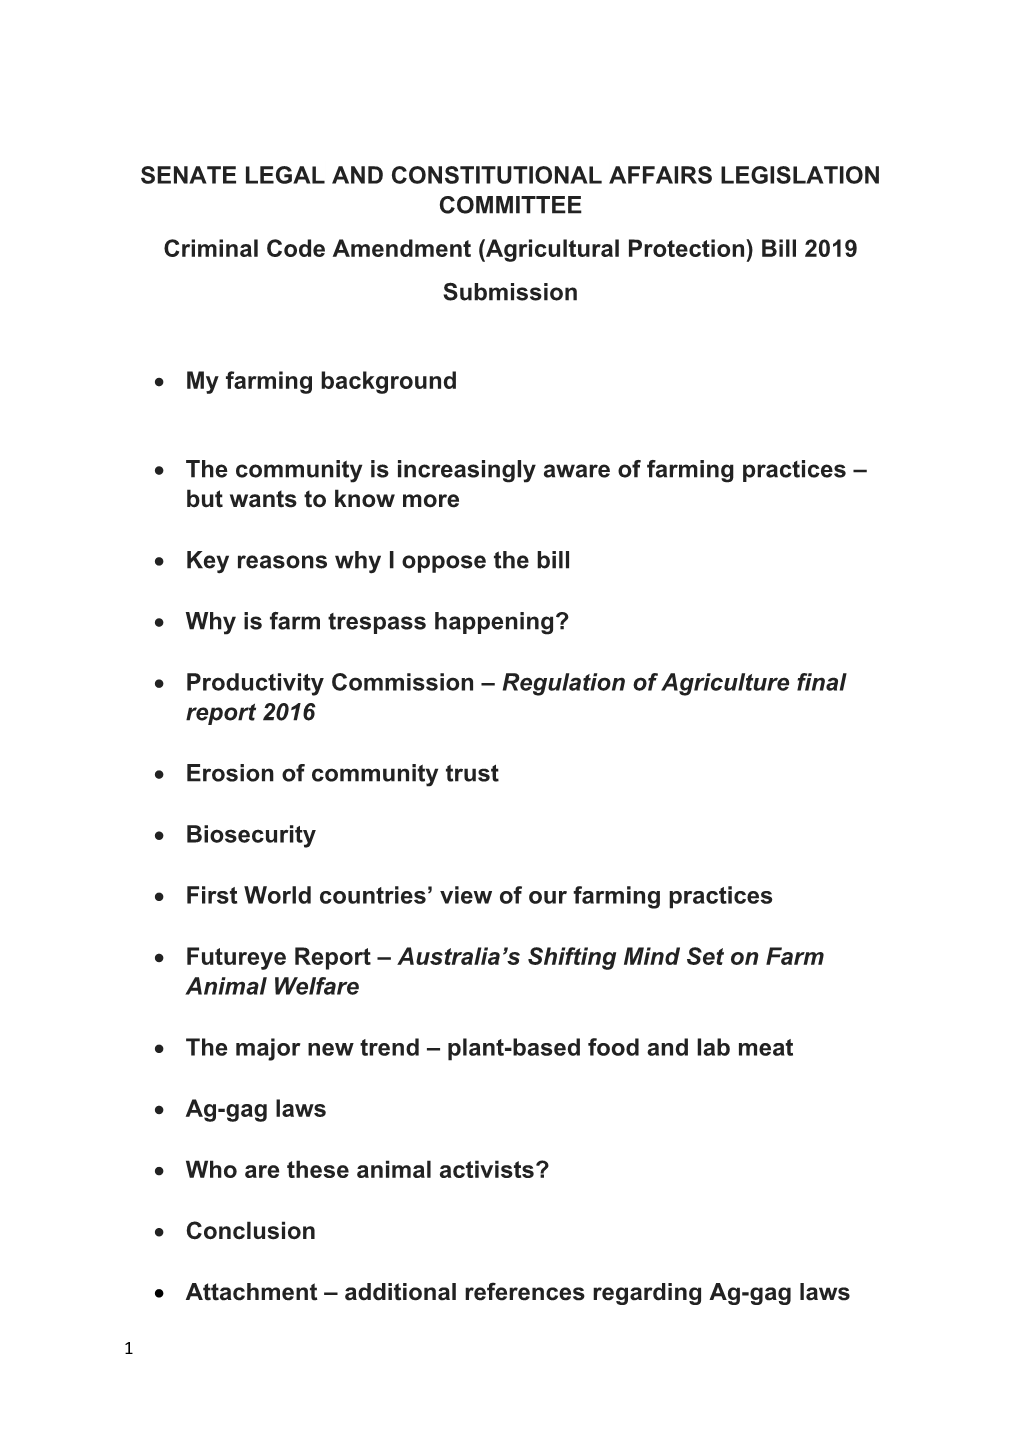 (Agricultural Protection) Bill 2019 Submission